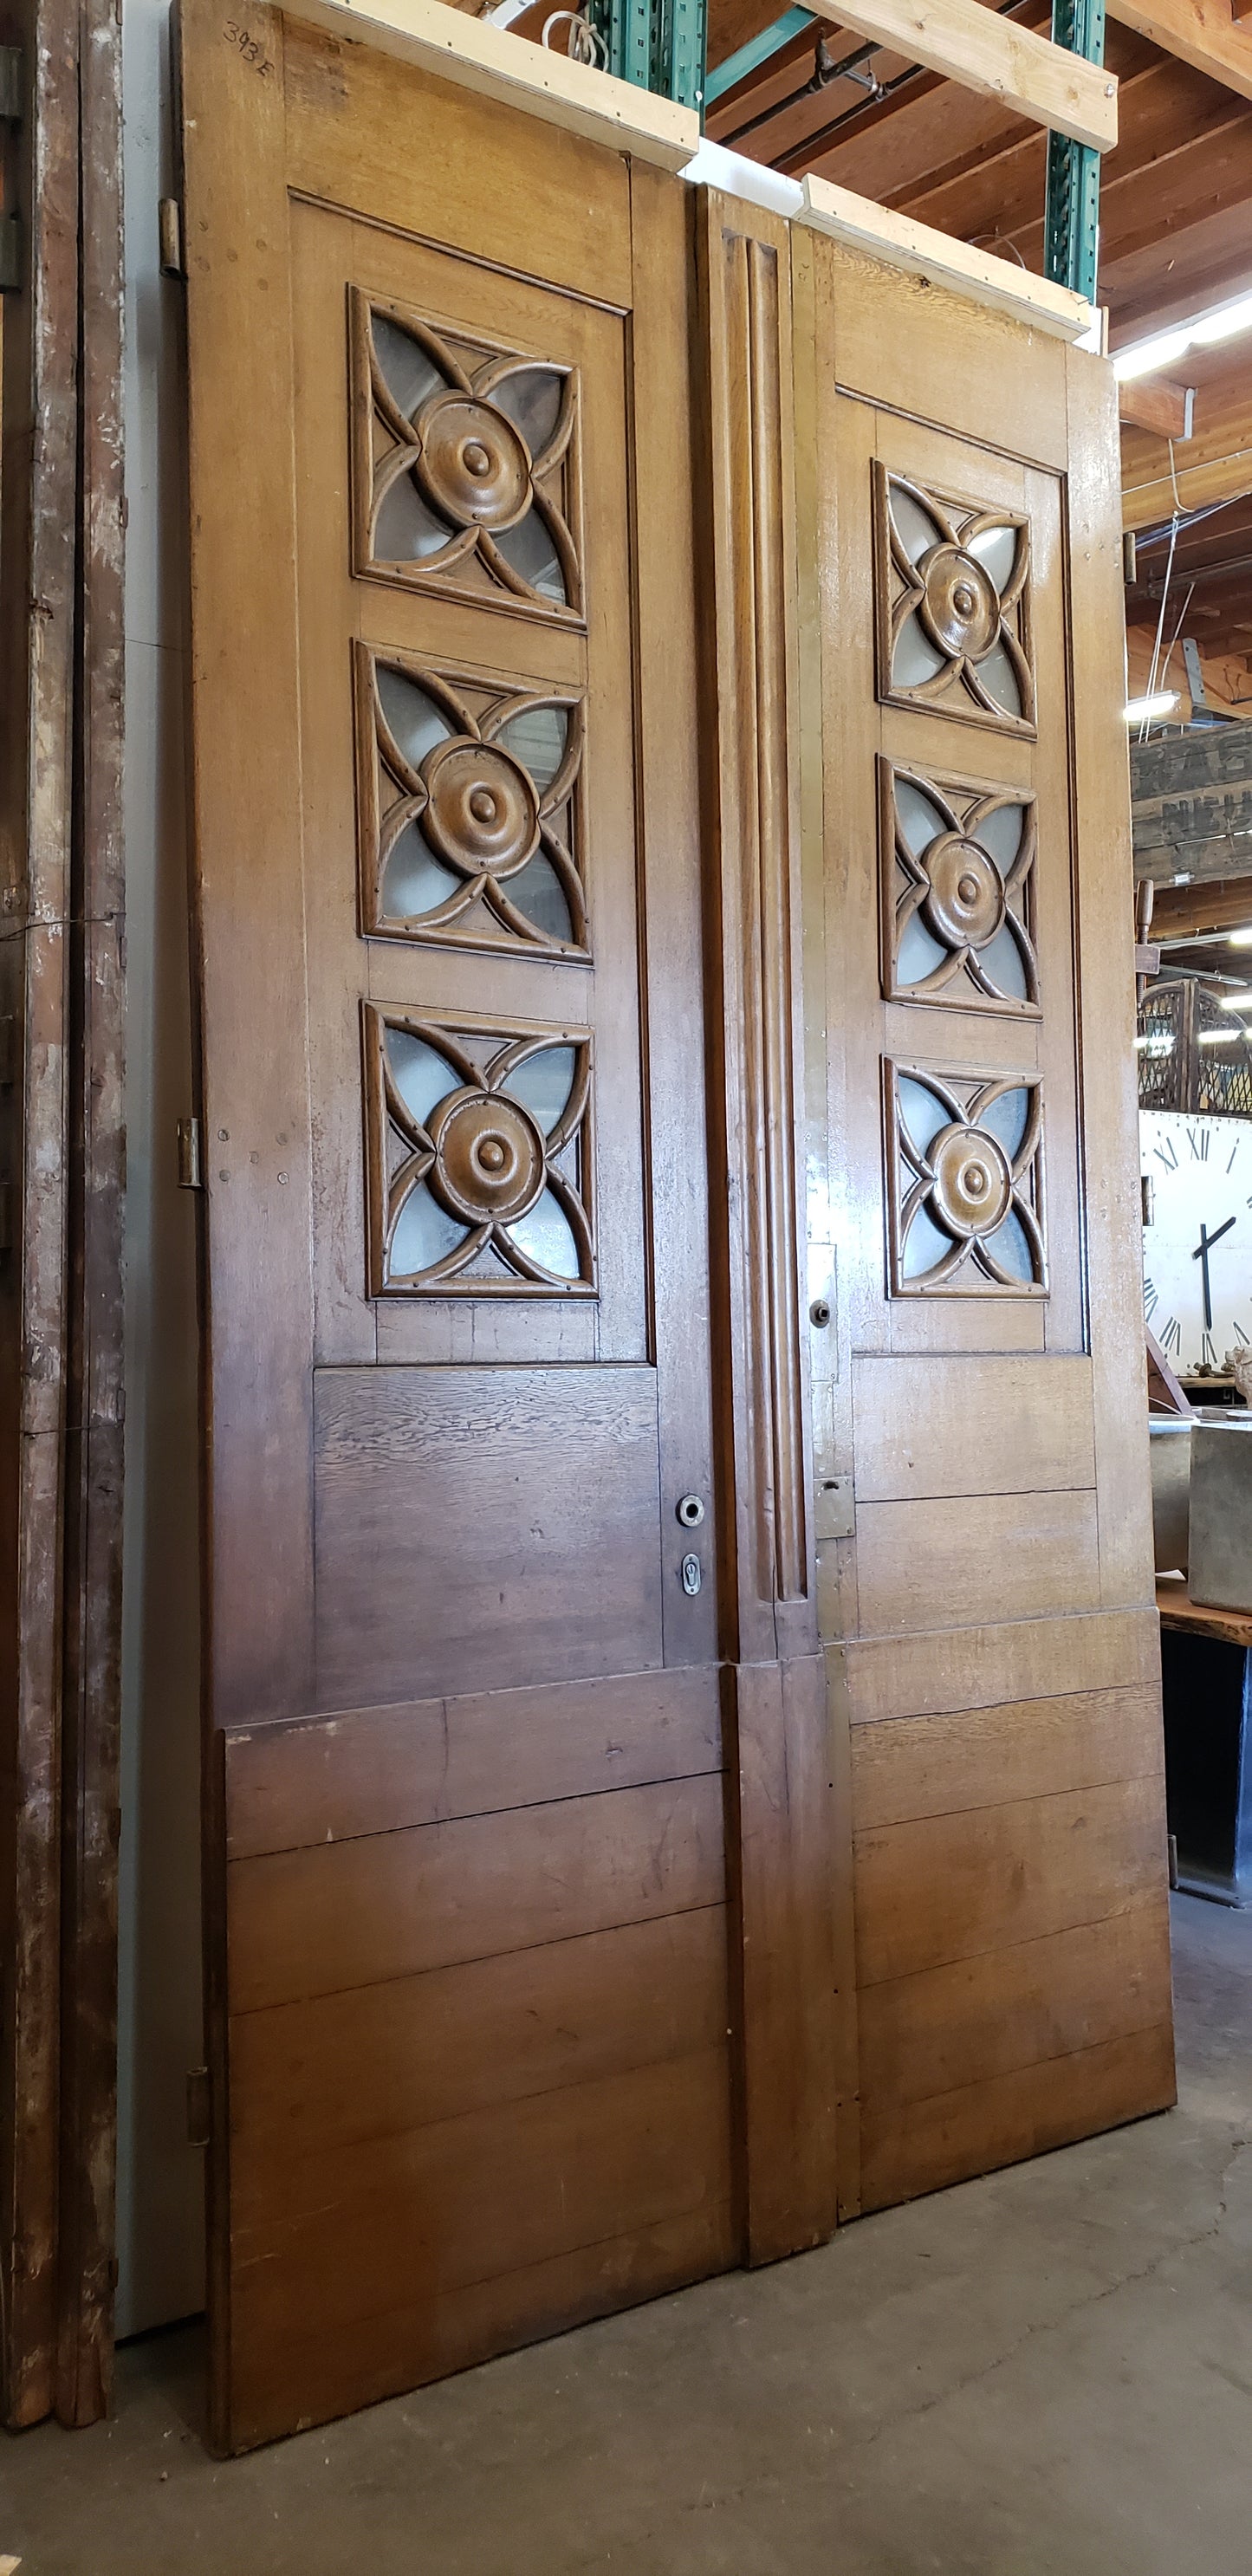 Antique Pair of Wood Carved Doors and Transom